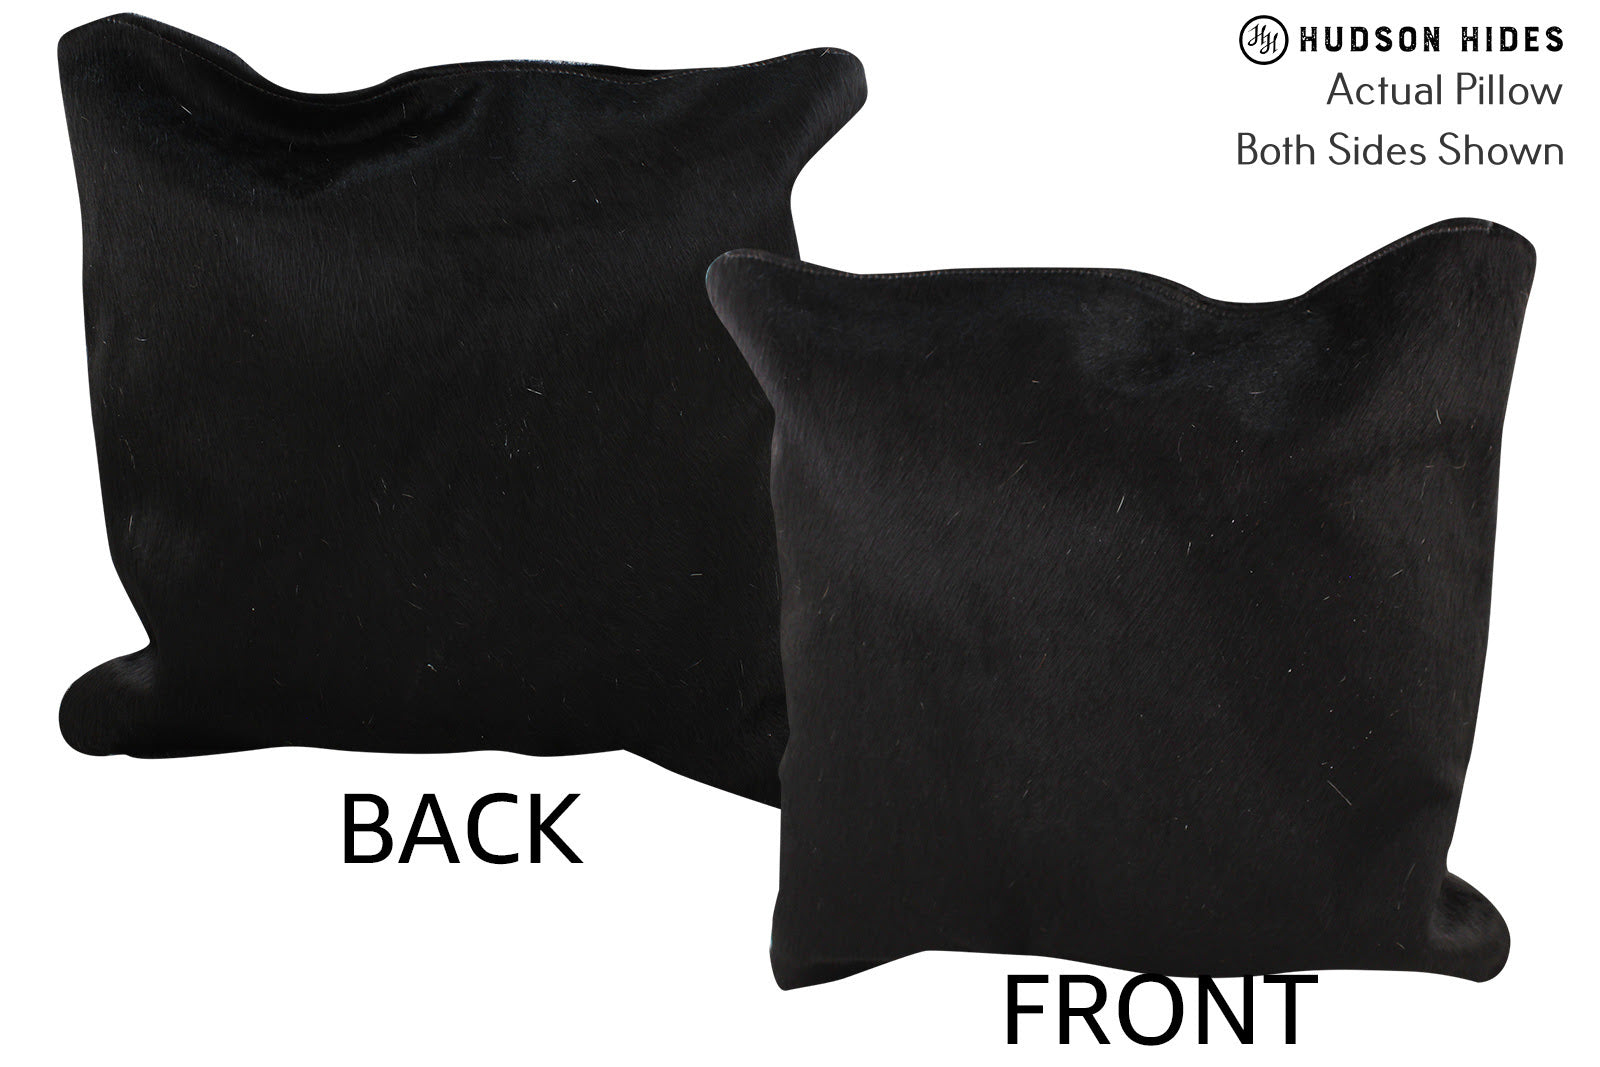 Solid Black Cowhide Pillow #74483